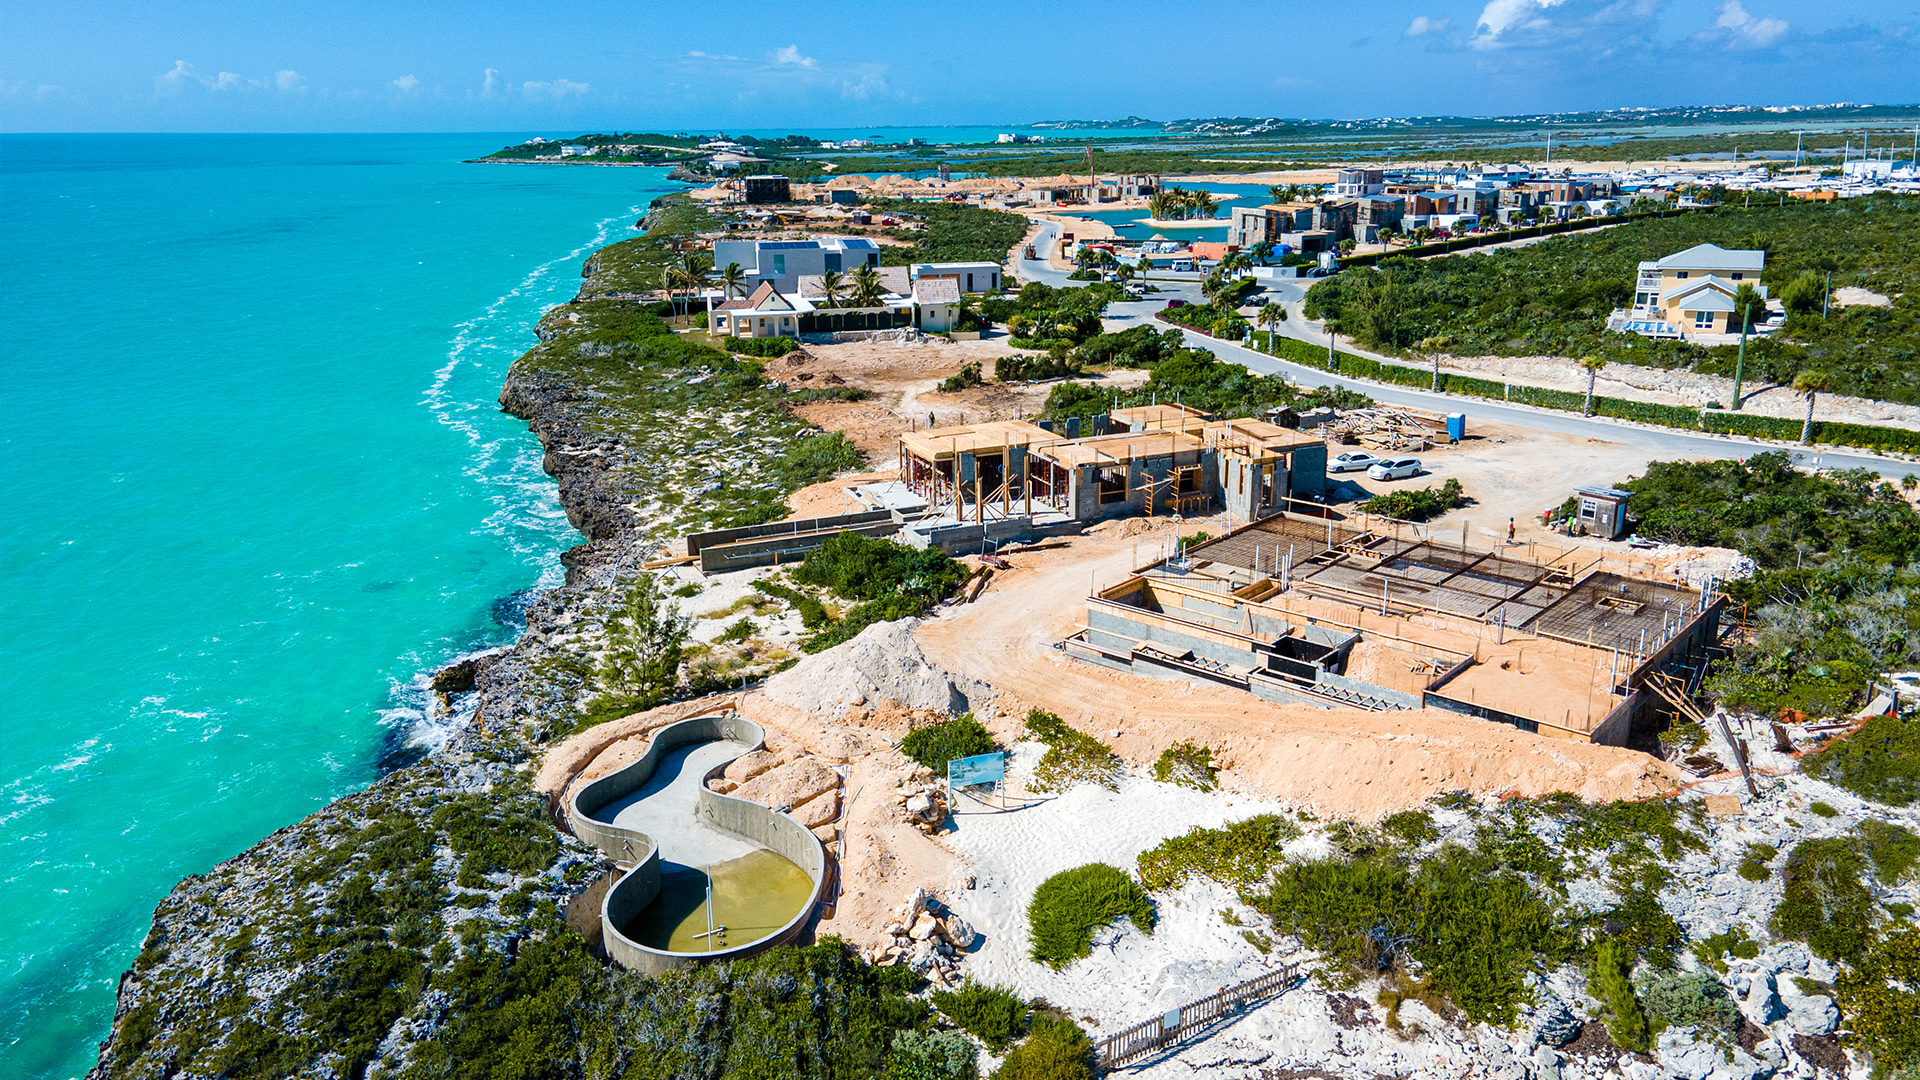 ©South Bank | Construction | Aerial View of The Ocean Estate